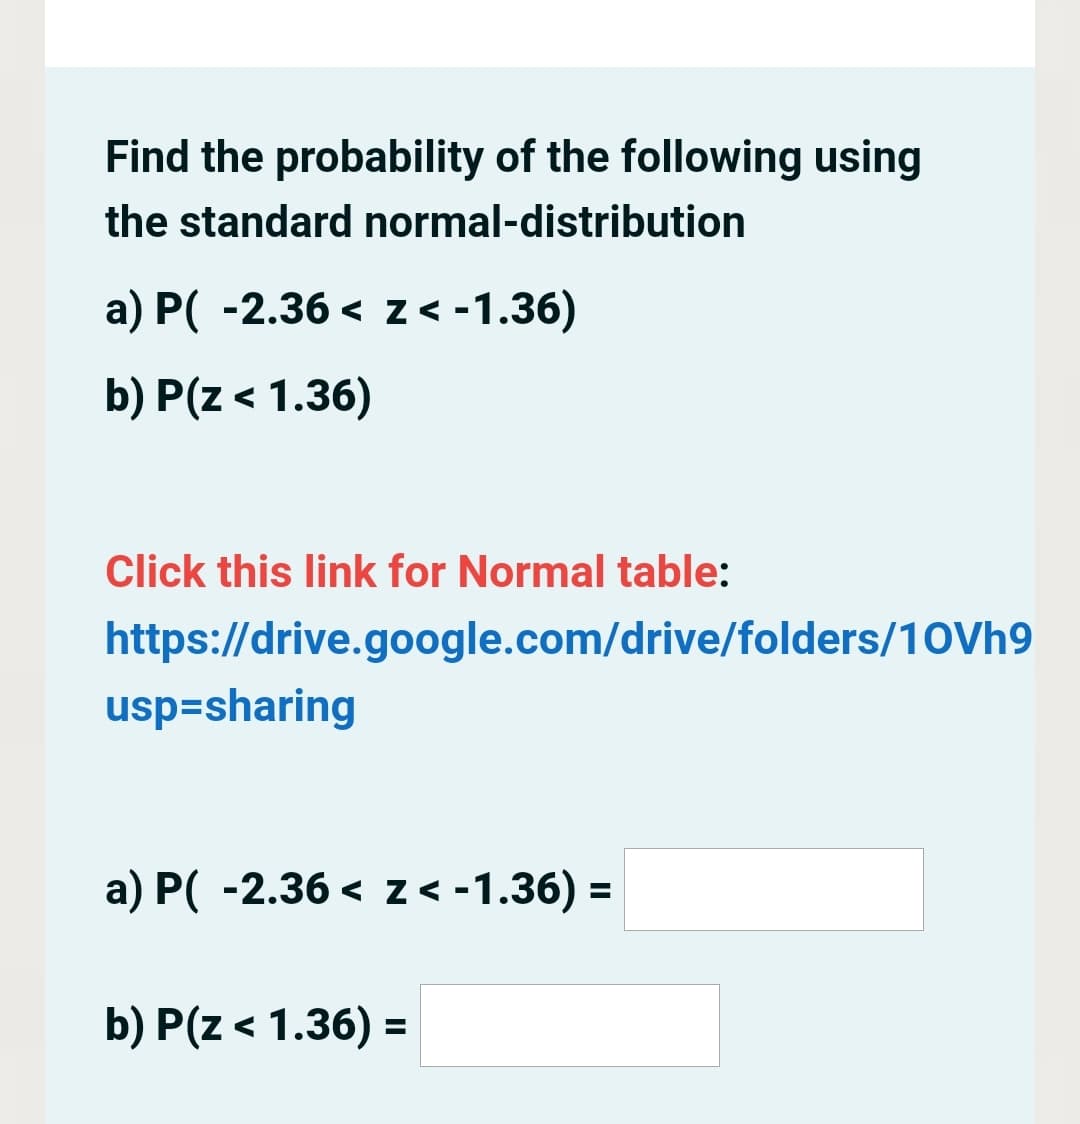 Find the probability of the following using
the standard normal-distribution
a) P( -2.36 < z< -1.36)
b) P(z < 1.36)
Click this link for Normal table:
https://drive.google.com/drive/folders/10Vh9
usp=sharing
a) P( -2.36 < z < -1.36) =
b) P(z < 1.36) =
